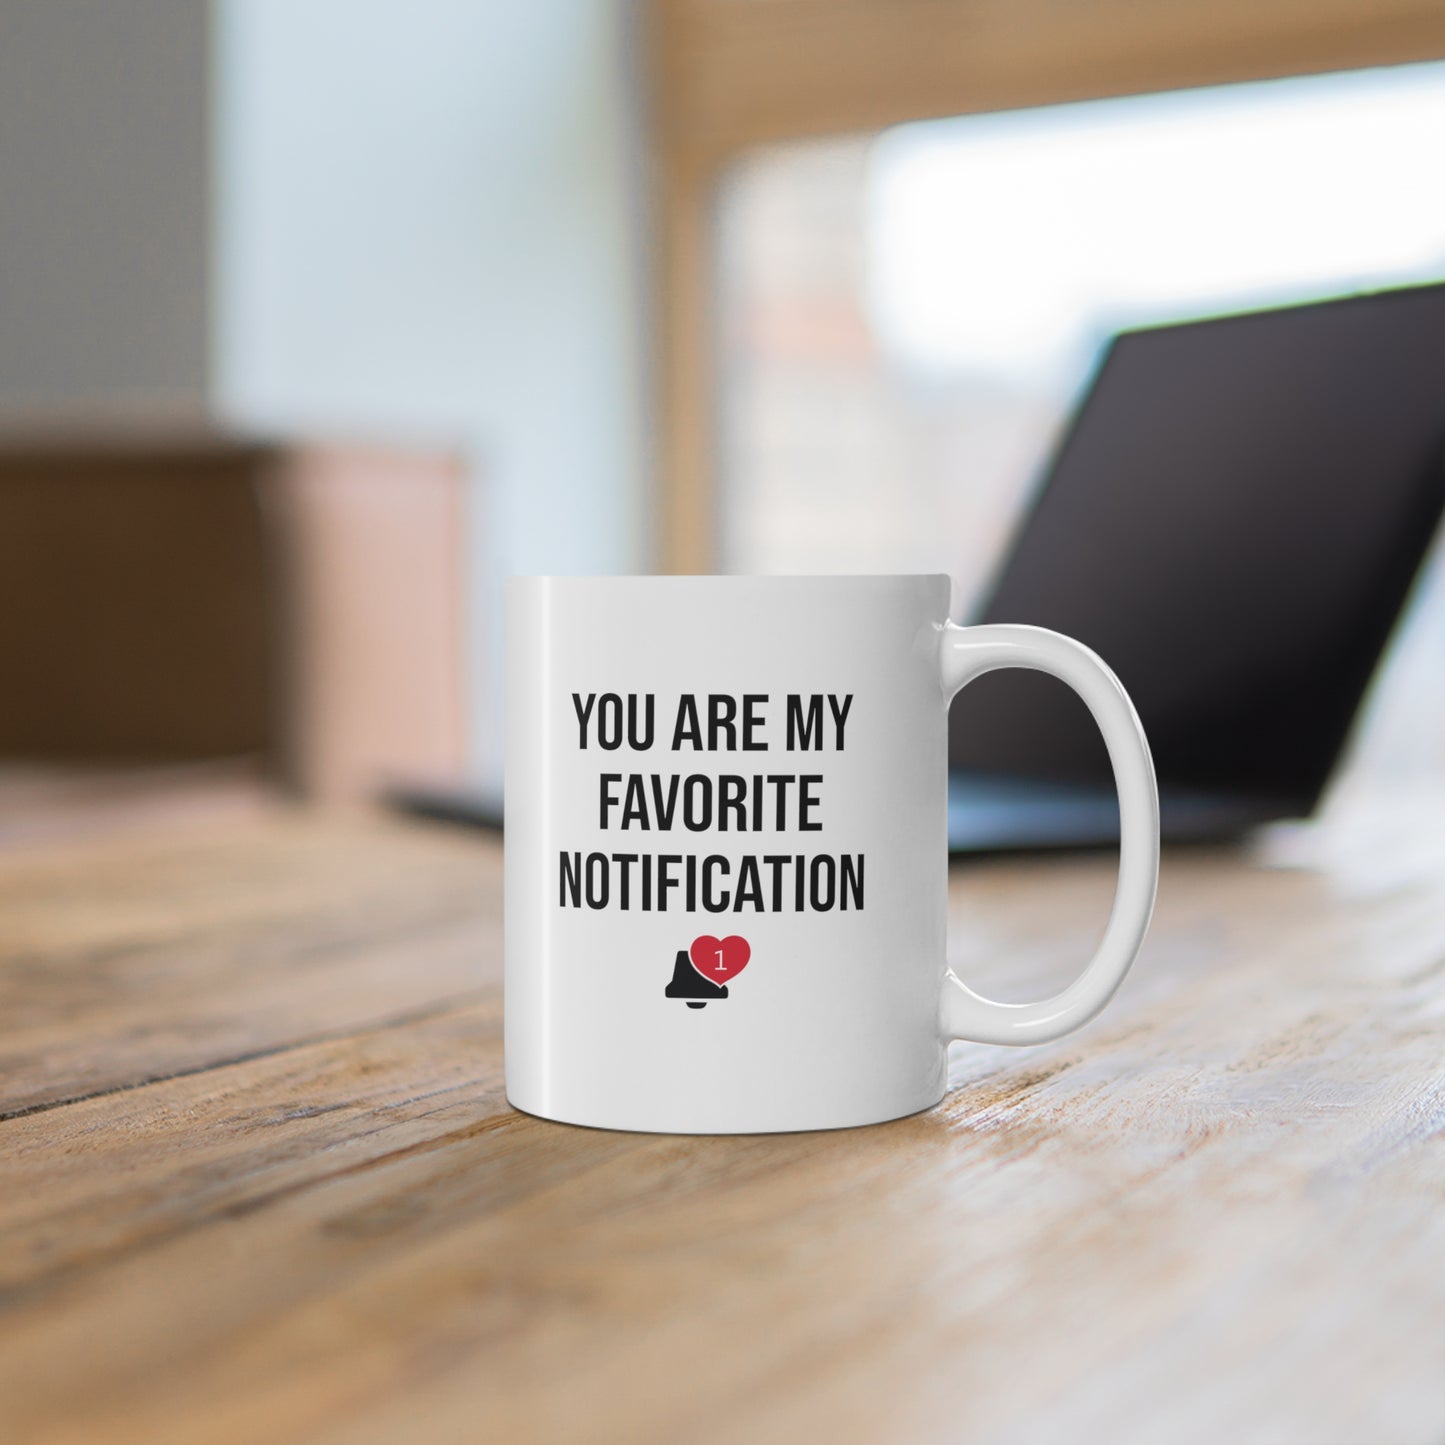 11oz ceramic mug with quote You are my favorite notification